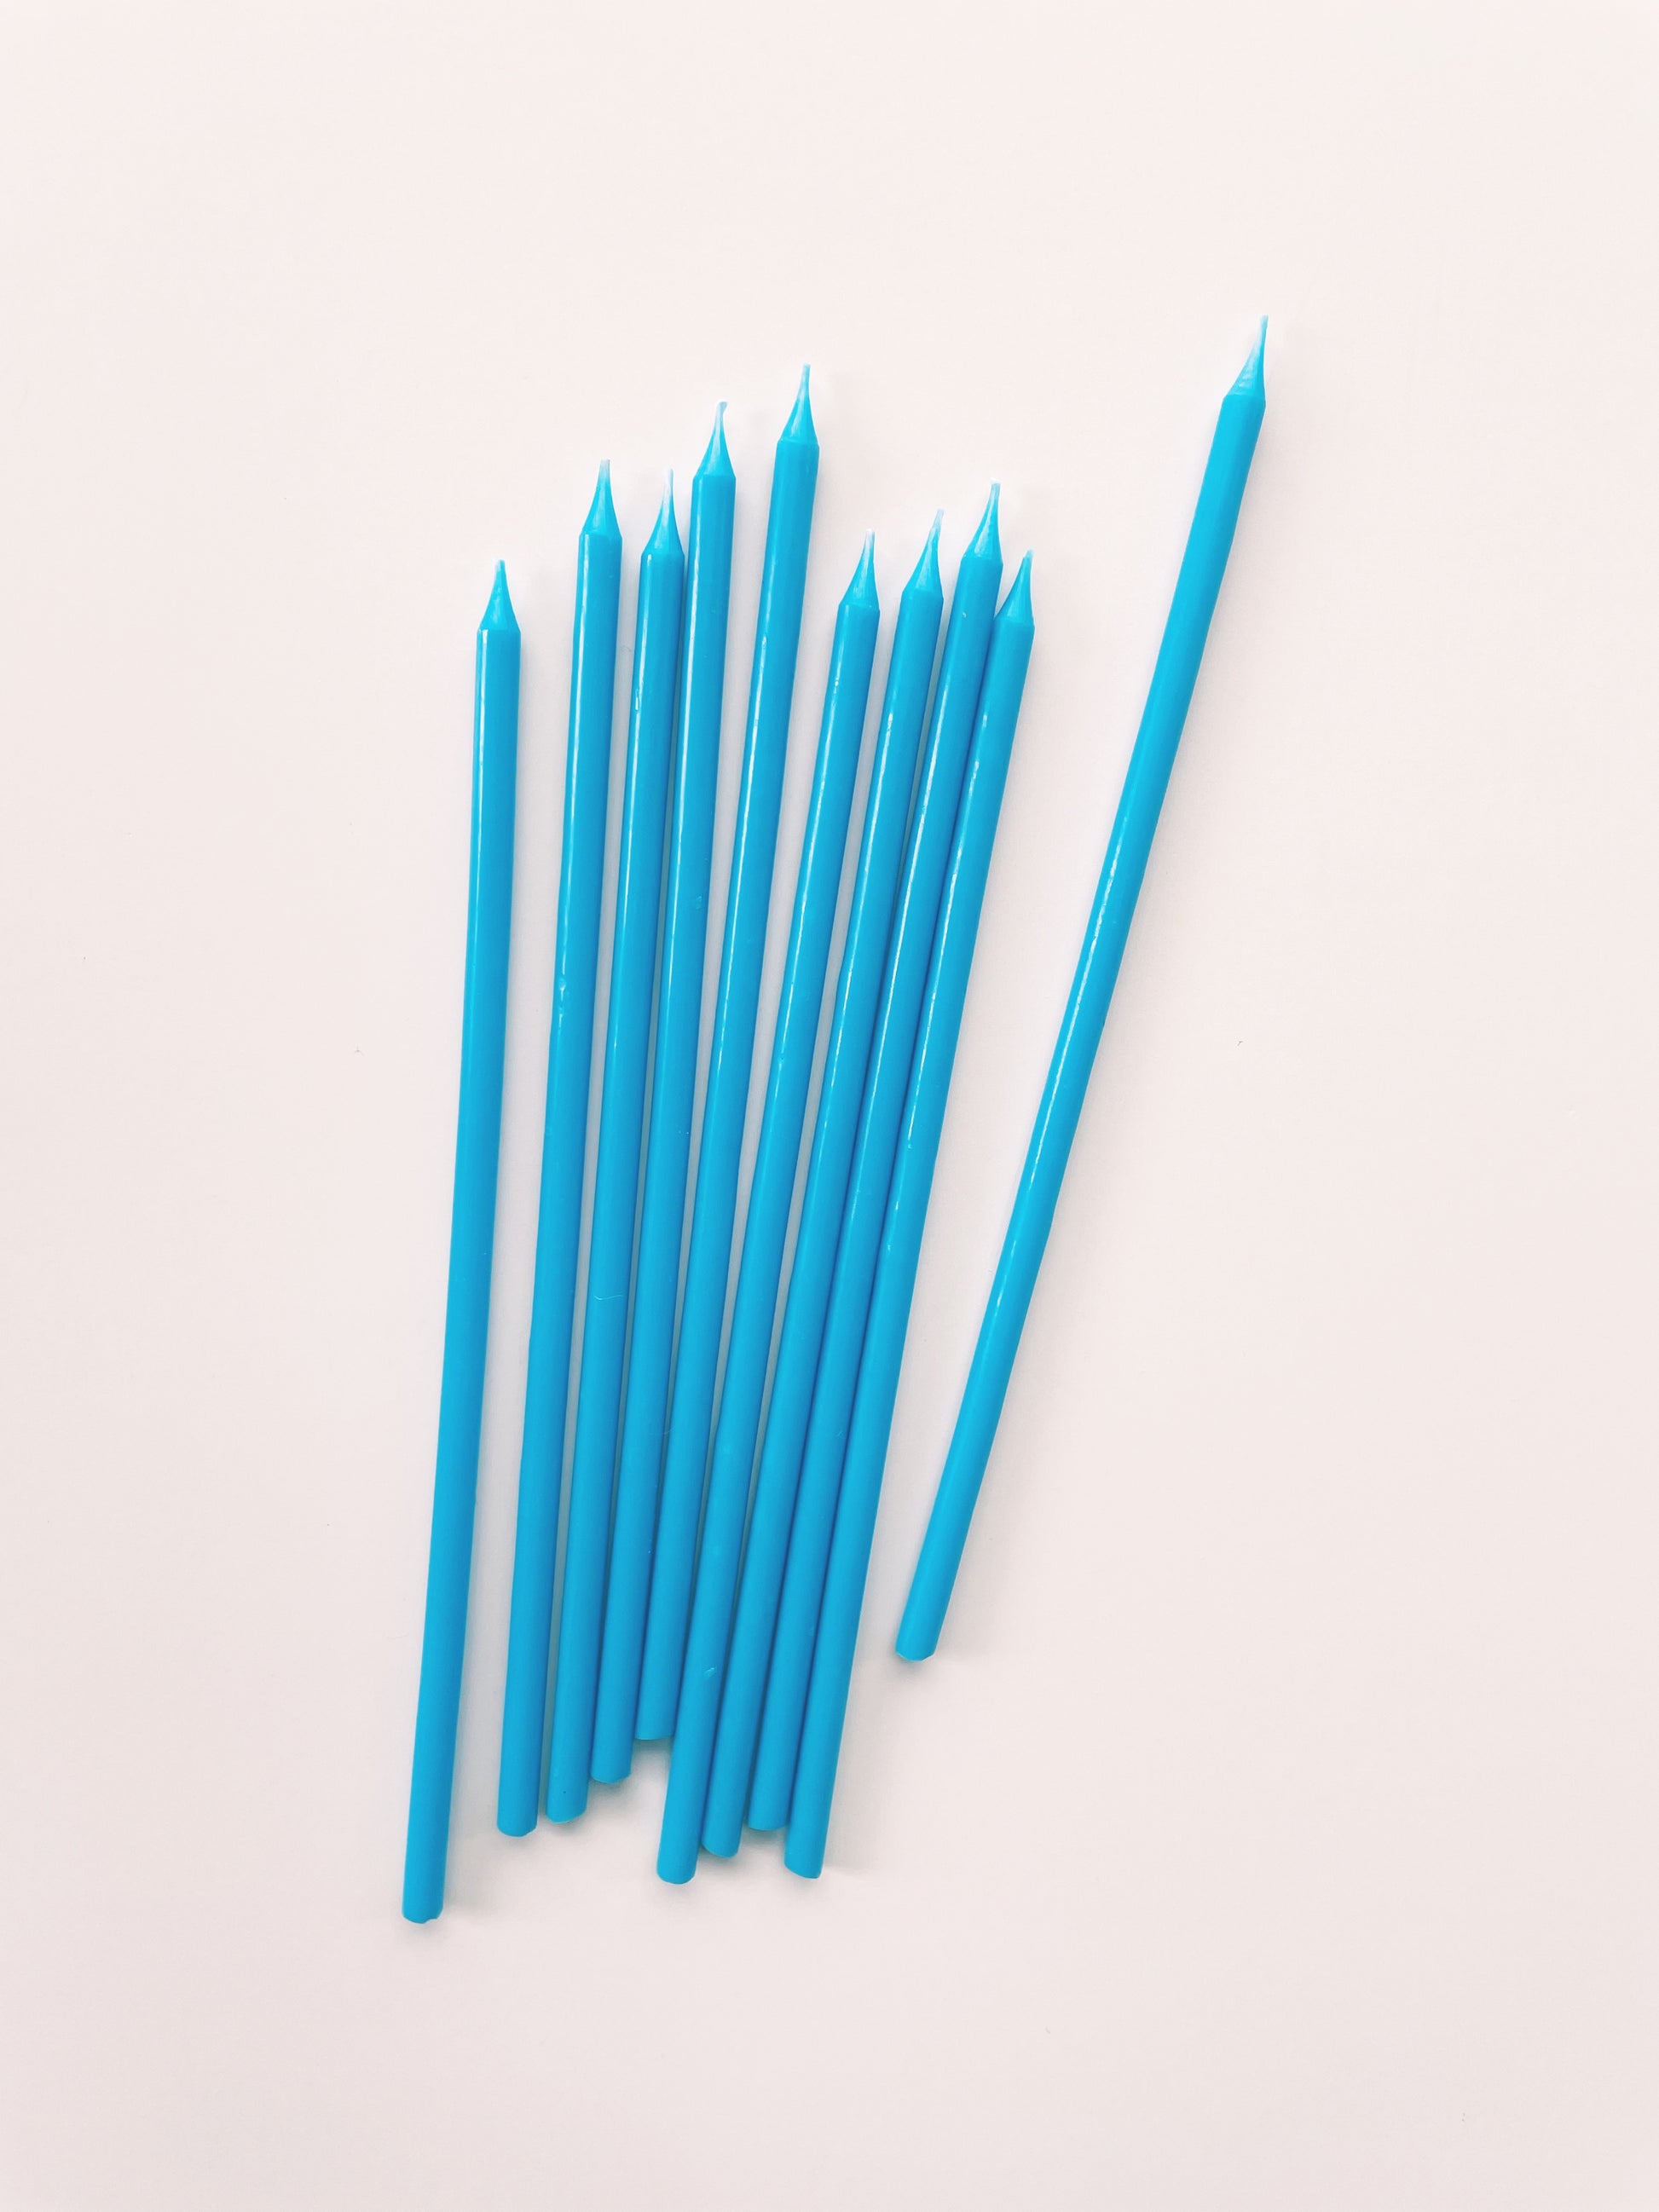 Tall teal birthday cake candles